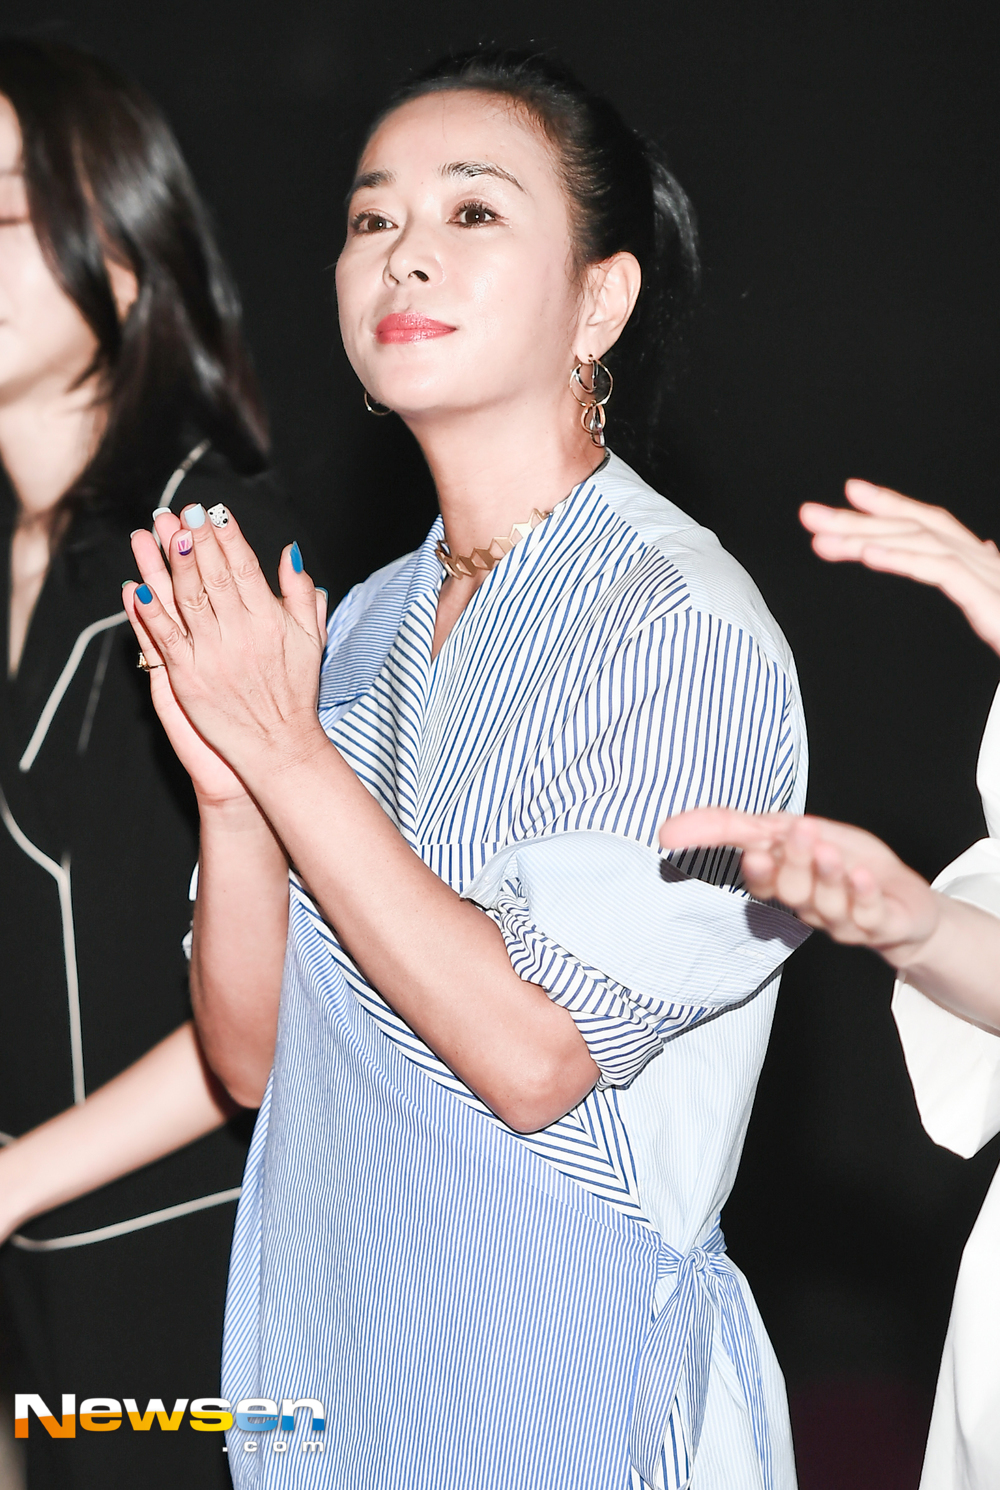 The movie witch (director Park, Hoon Jung) stage greetings were held at Lotte Cinema Suwon in Gwon Seon-gu, Suwon, Gyeonggi-do on the afternoon of June 30.Park, Hoon Jung, Kim Dae-mi, Jo Min-soo, Hee-soon Park, Choi Woo-shik, Gomin City and Dae Eun attended the ceremony.The movie witch is a mystery action film that depicts the plot and secrets surrounding a high school girl who escaped from a shelter and grew up under an elderly couple.Lee Jae-ha